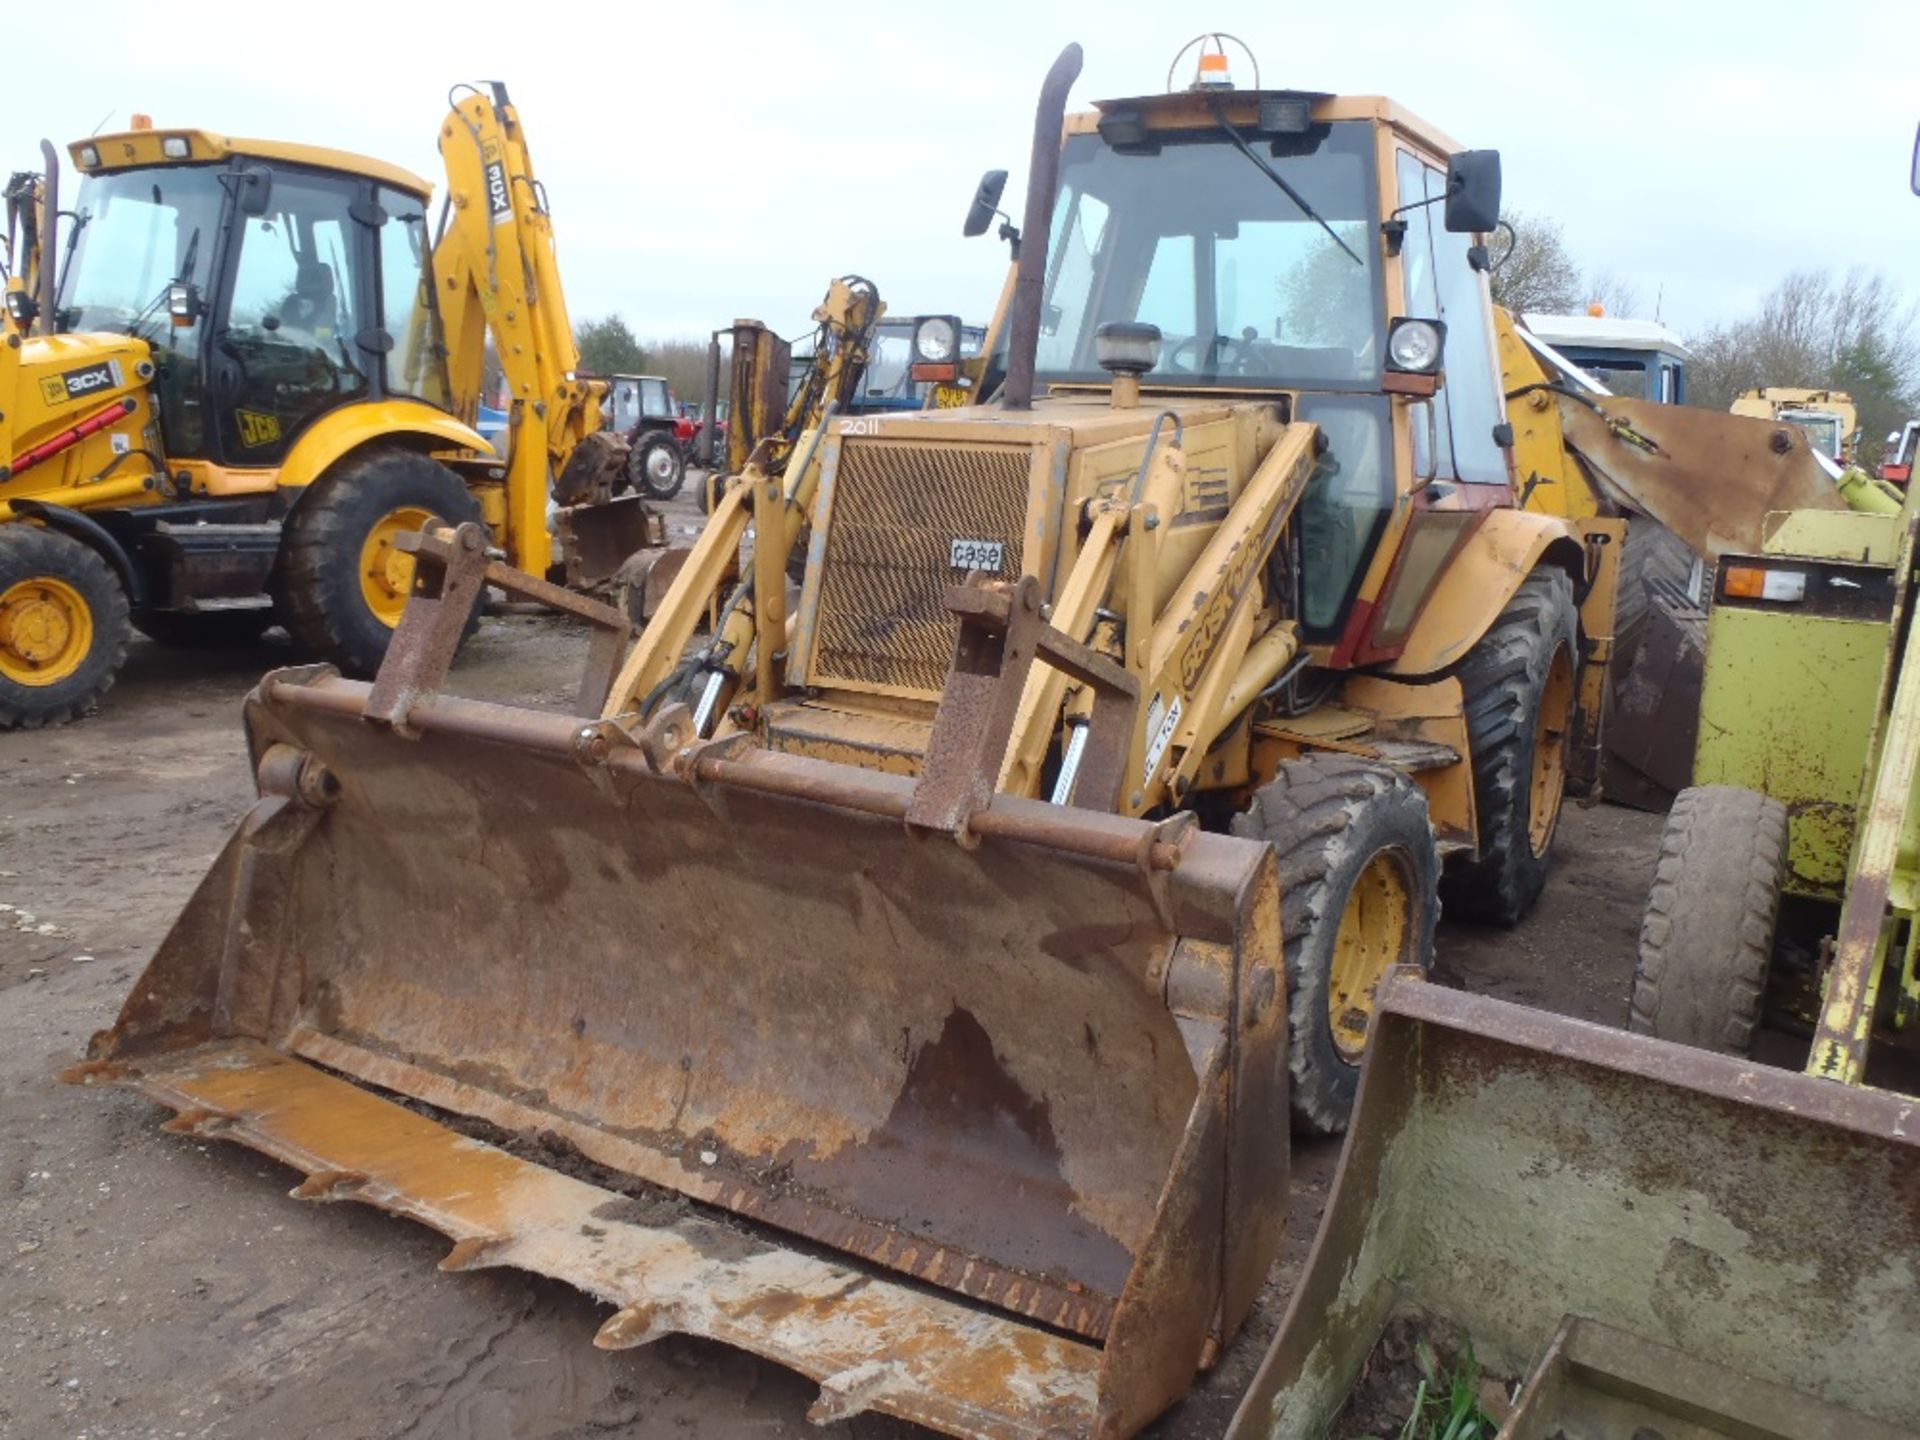 1994 Case 580 5K Turbo Digger Loader with 4no. Buckets. V5 will be supplied.   6700 hrs.  Reg.No.